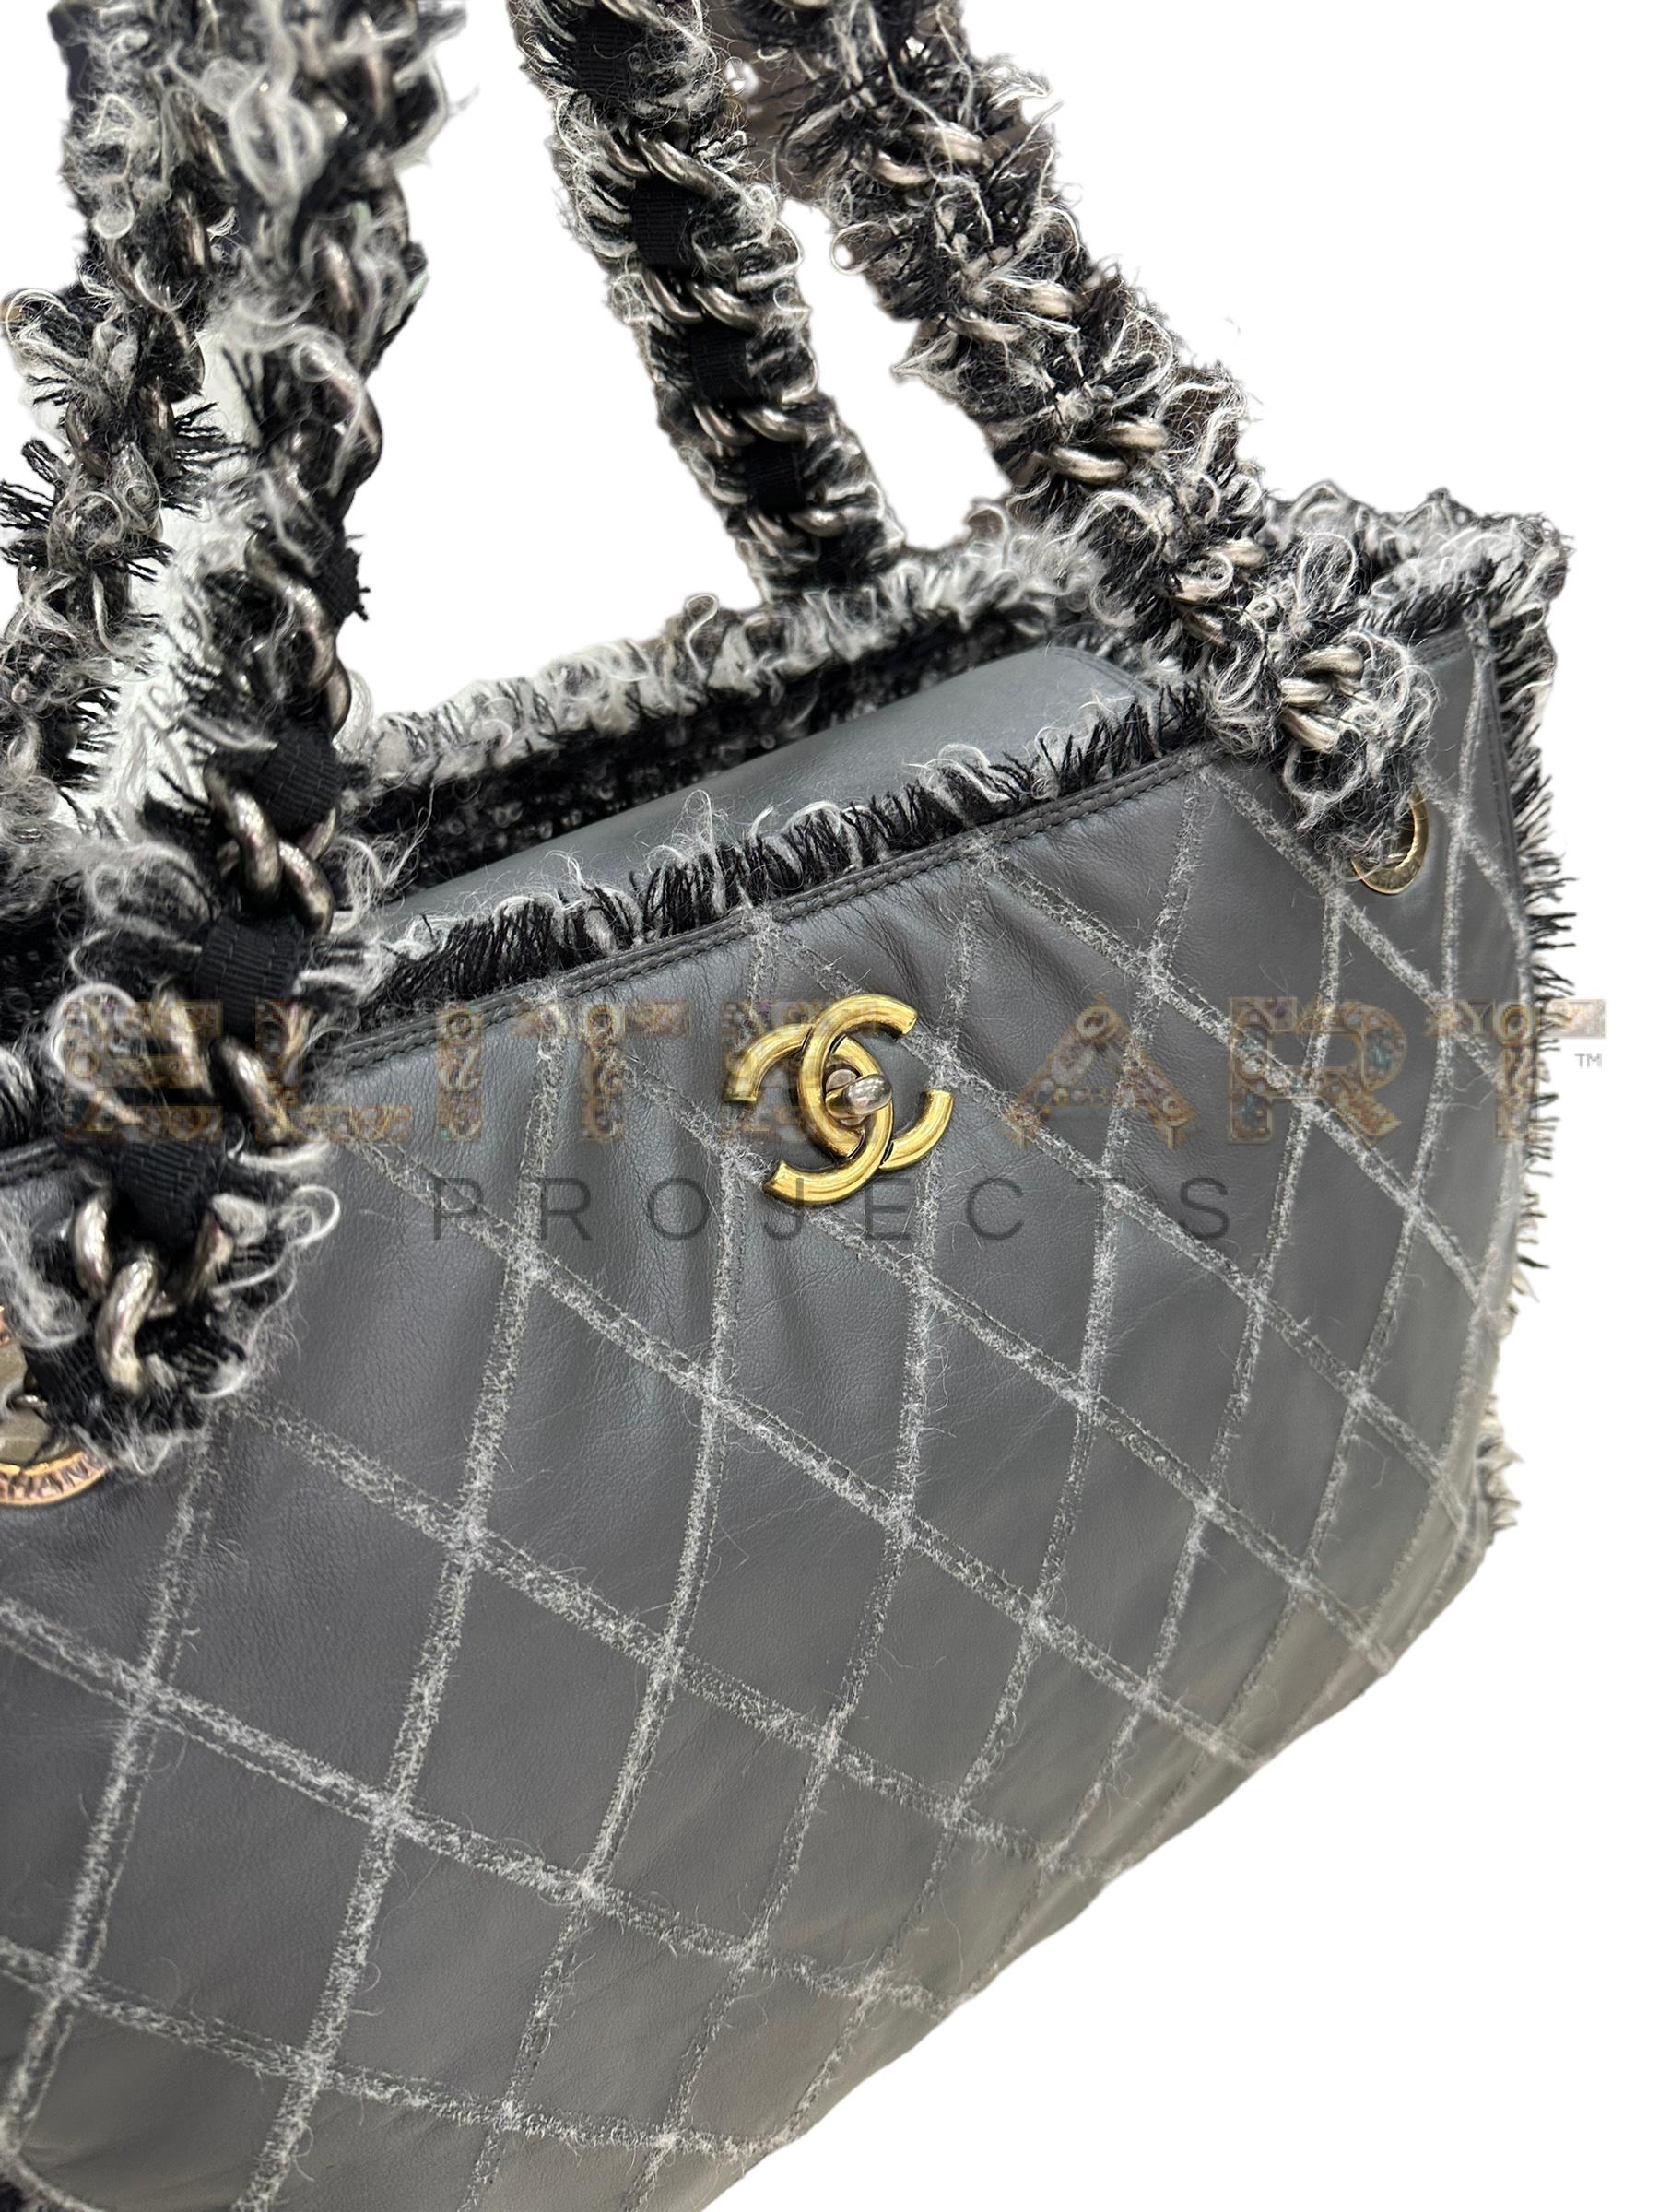 Chanel, tote bag, gray, canvas, tweed inserts, gold hardware, flap closure, excellent condition